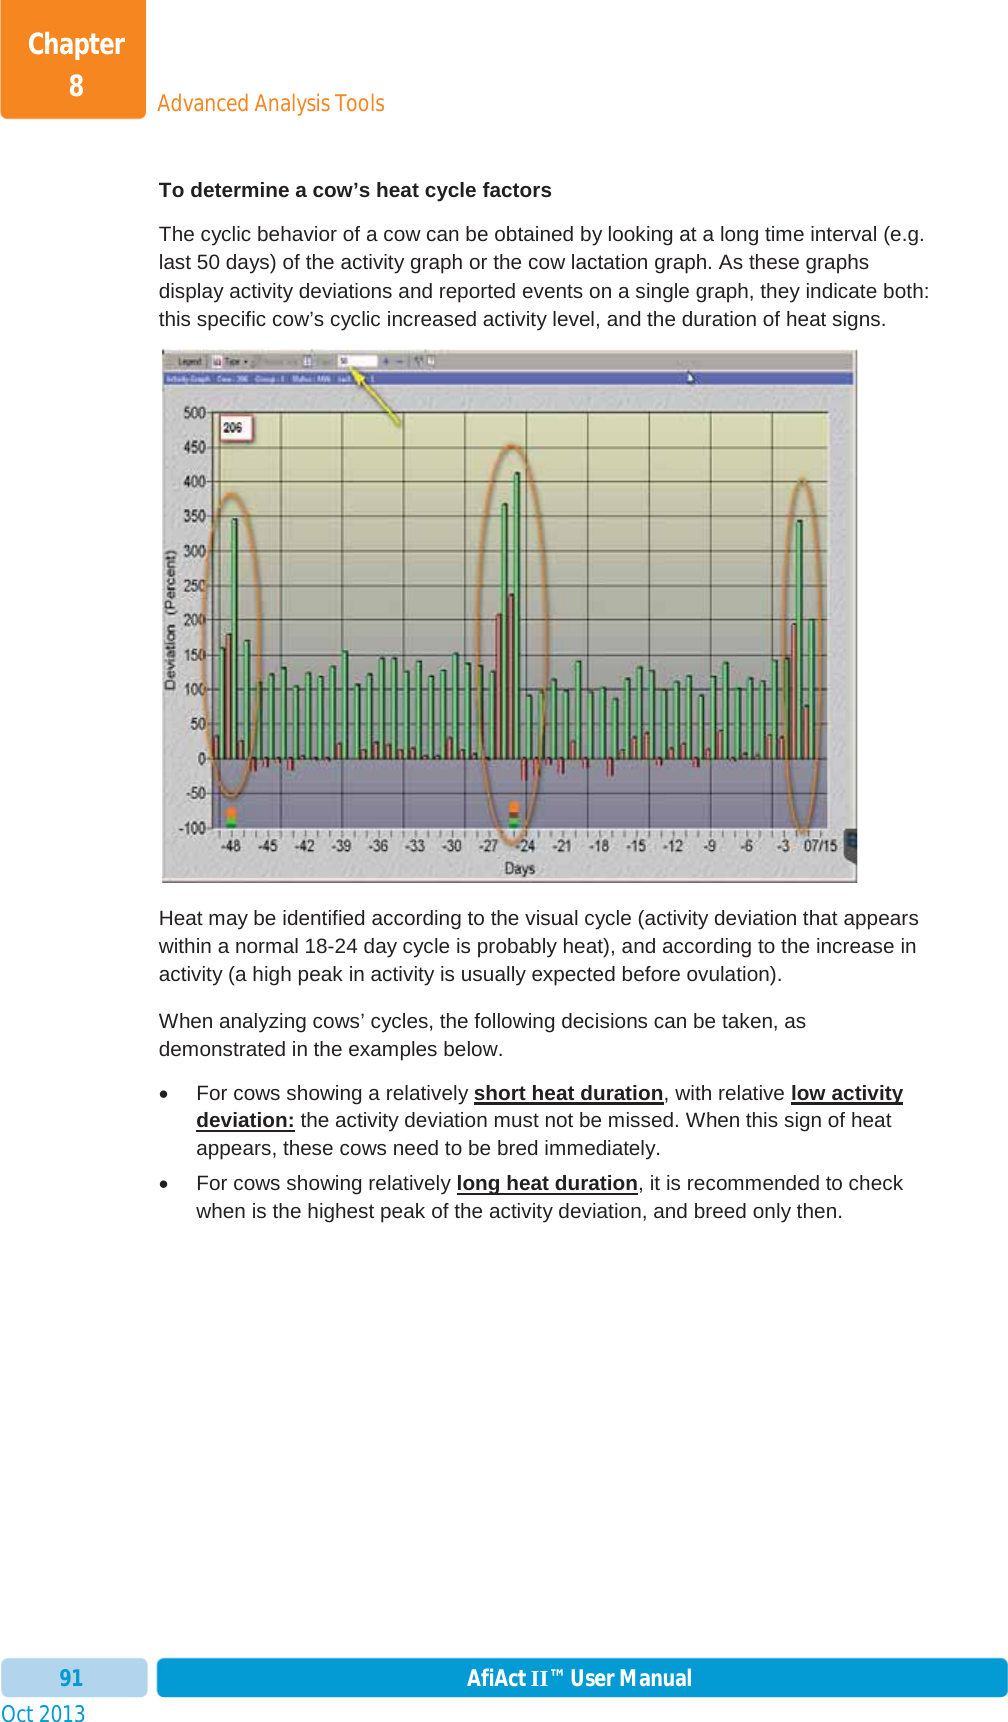 Oct 2013 AfiAct II™ User Manual91Advanced Analysis ToolsChapter 8To determine a cow’s heat cycle factors The cyclic behavior of a cow can be obtained by looking at a long time interval (e.g. last 50 days) of the activity graph or the cow lactation graph. As these graphs display activity deviations and reported events on a single graph, they indicate both: this specific cow’s cyclic increased activity level, and the duration of heat signs. Heat may be identified according to the visual cycle (activity deviation that appears within a normal 18-24 day cycle is probably heat), and according to the increase in activity (a high peak in activity is usually expected before ovulation).  When analyzing cows’ cycles, the following decisions can be taken, as demonstrated in the examples below. x  For cows showing a relatively short heat duration, with relative low activitydeviation: the activity deviation must not be missed. When this sign of heat appears, these cows need to be bred immediately.  x  For cows showing relatively long heat duration, it is recommended to check when is the highest peak of the activity deviation, and breed only then.  